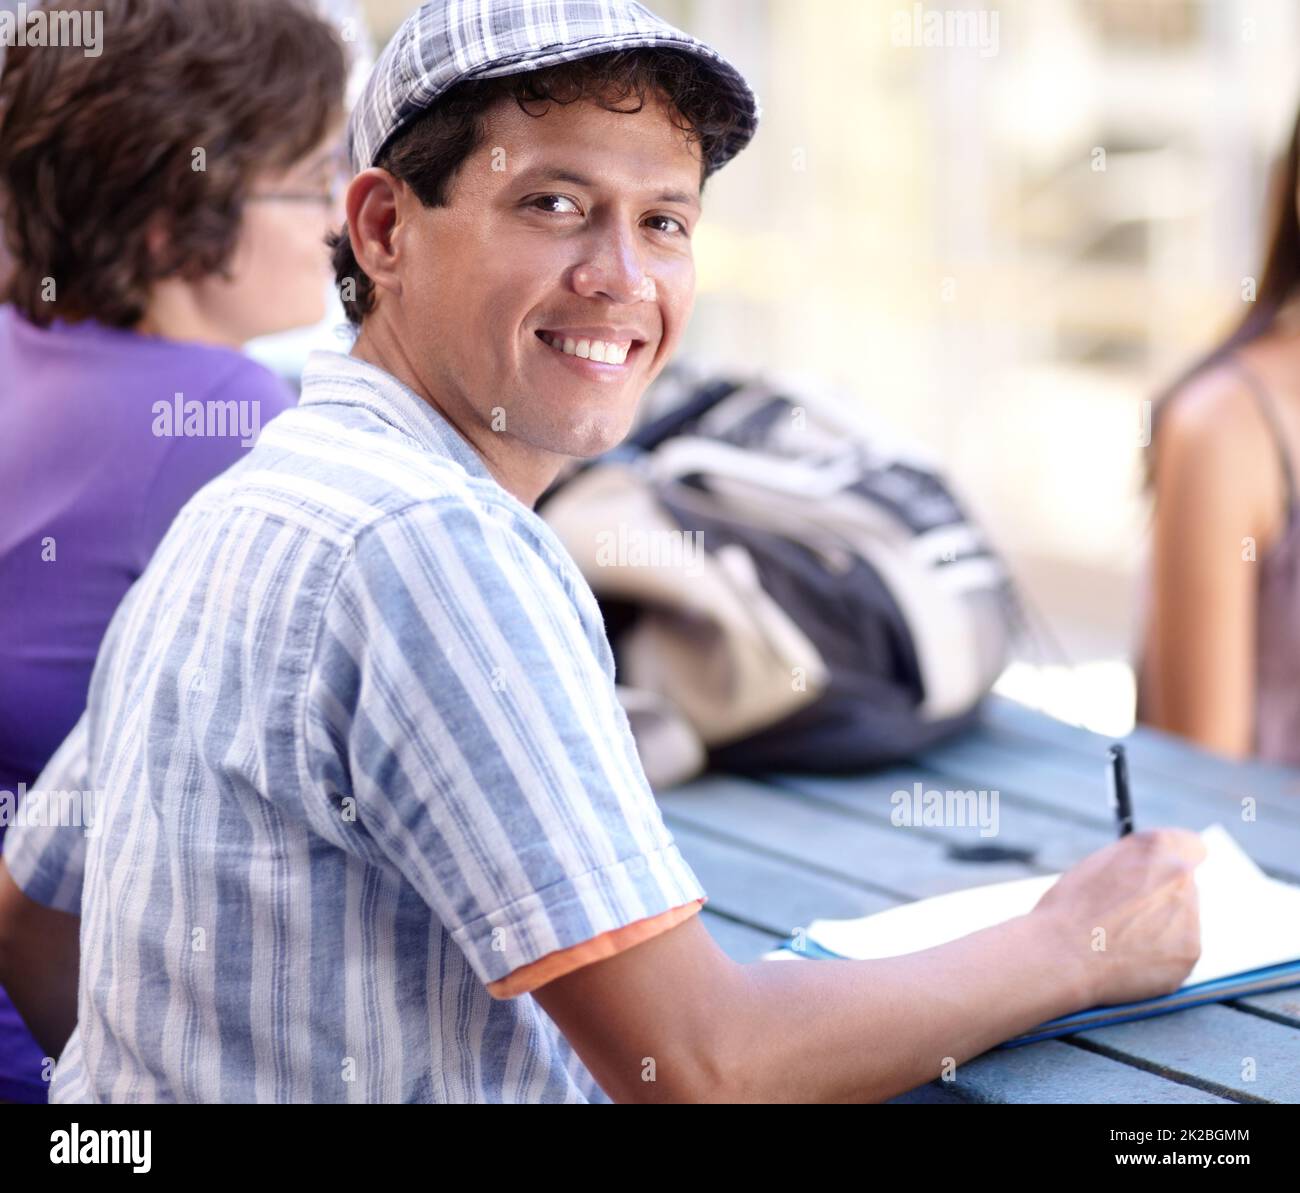 He uses breaktime for extra studies. A young ethnic man writing down some notes during break. Stock Photo